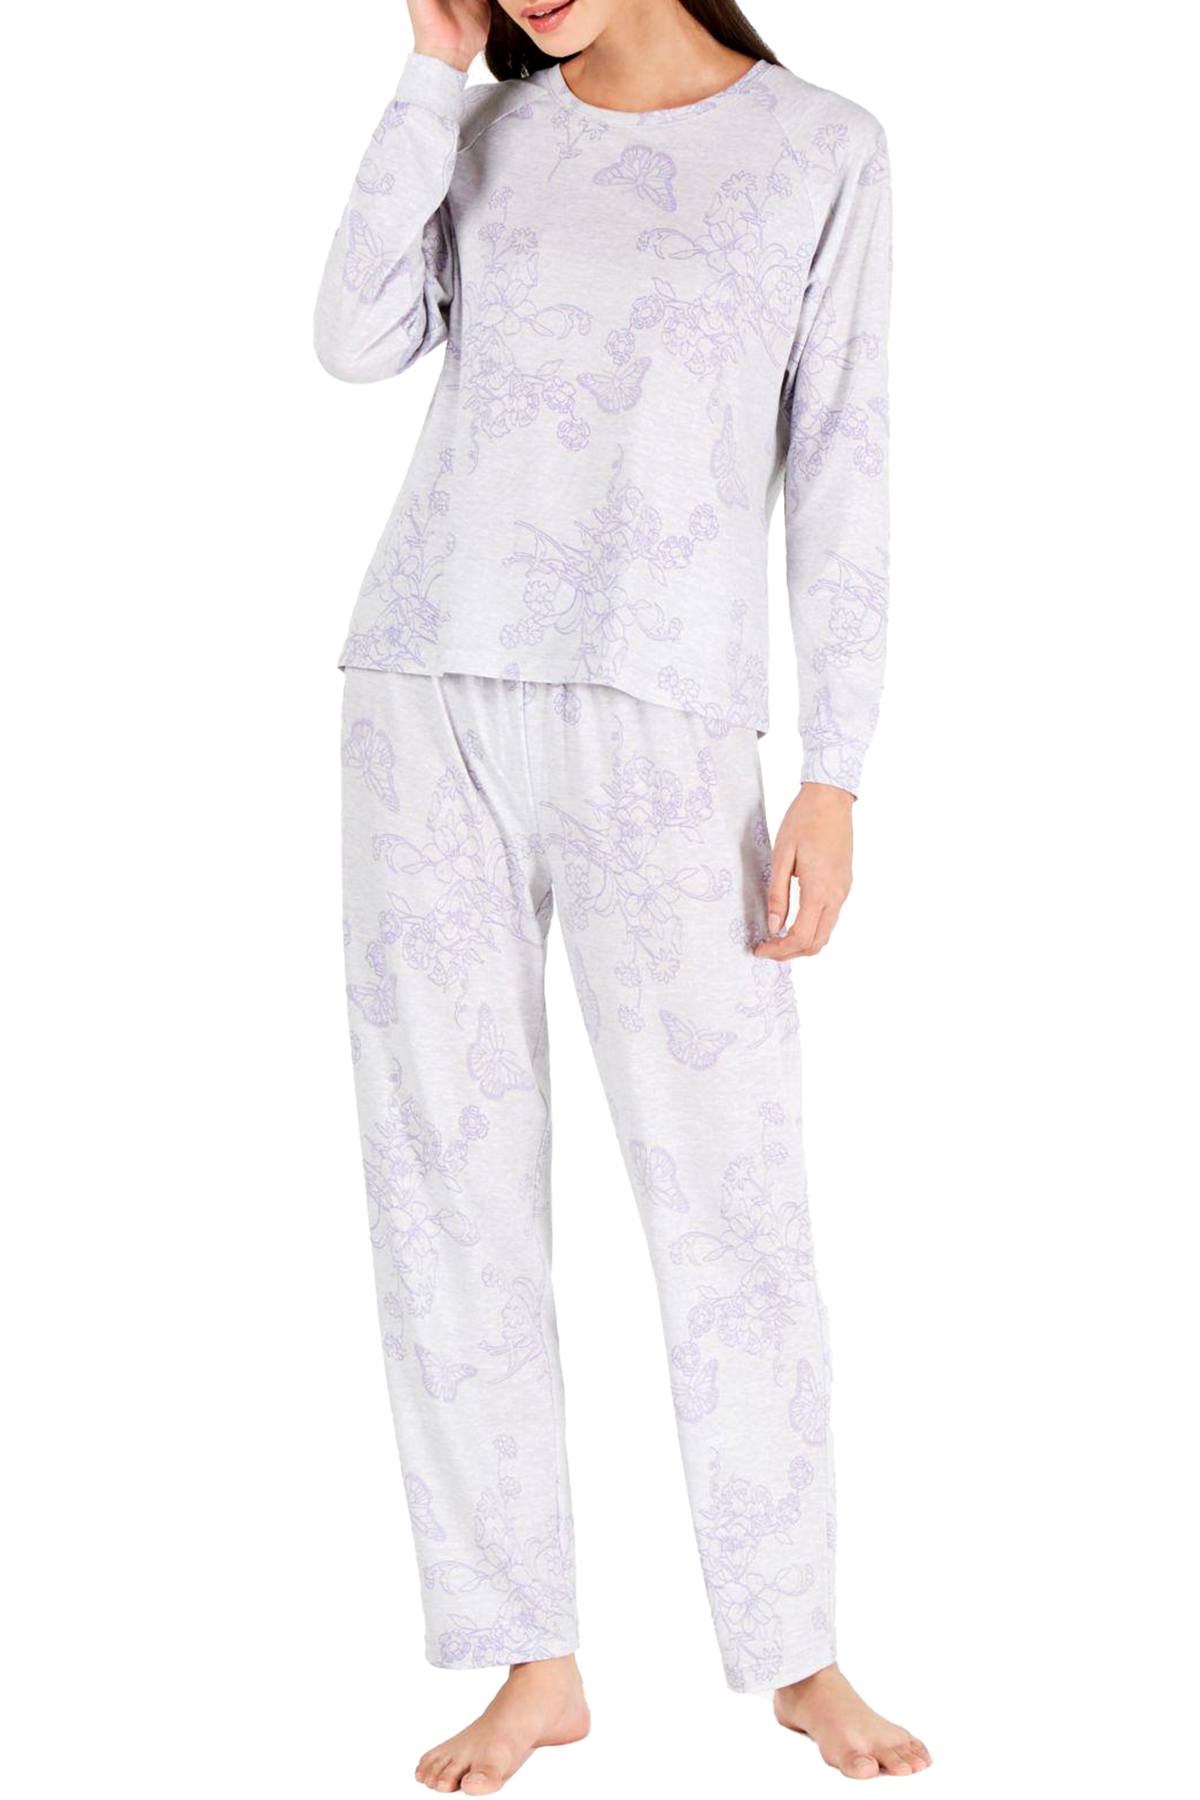 Charter Club Intimates Super Soft Knit Pajama Set in Fluttering Butterfly Print